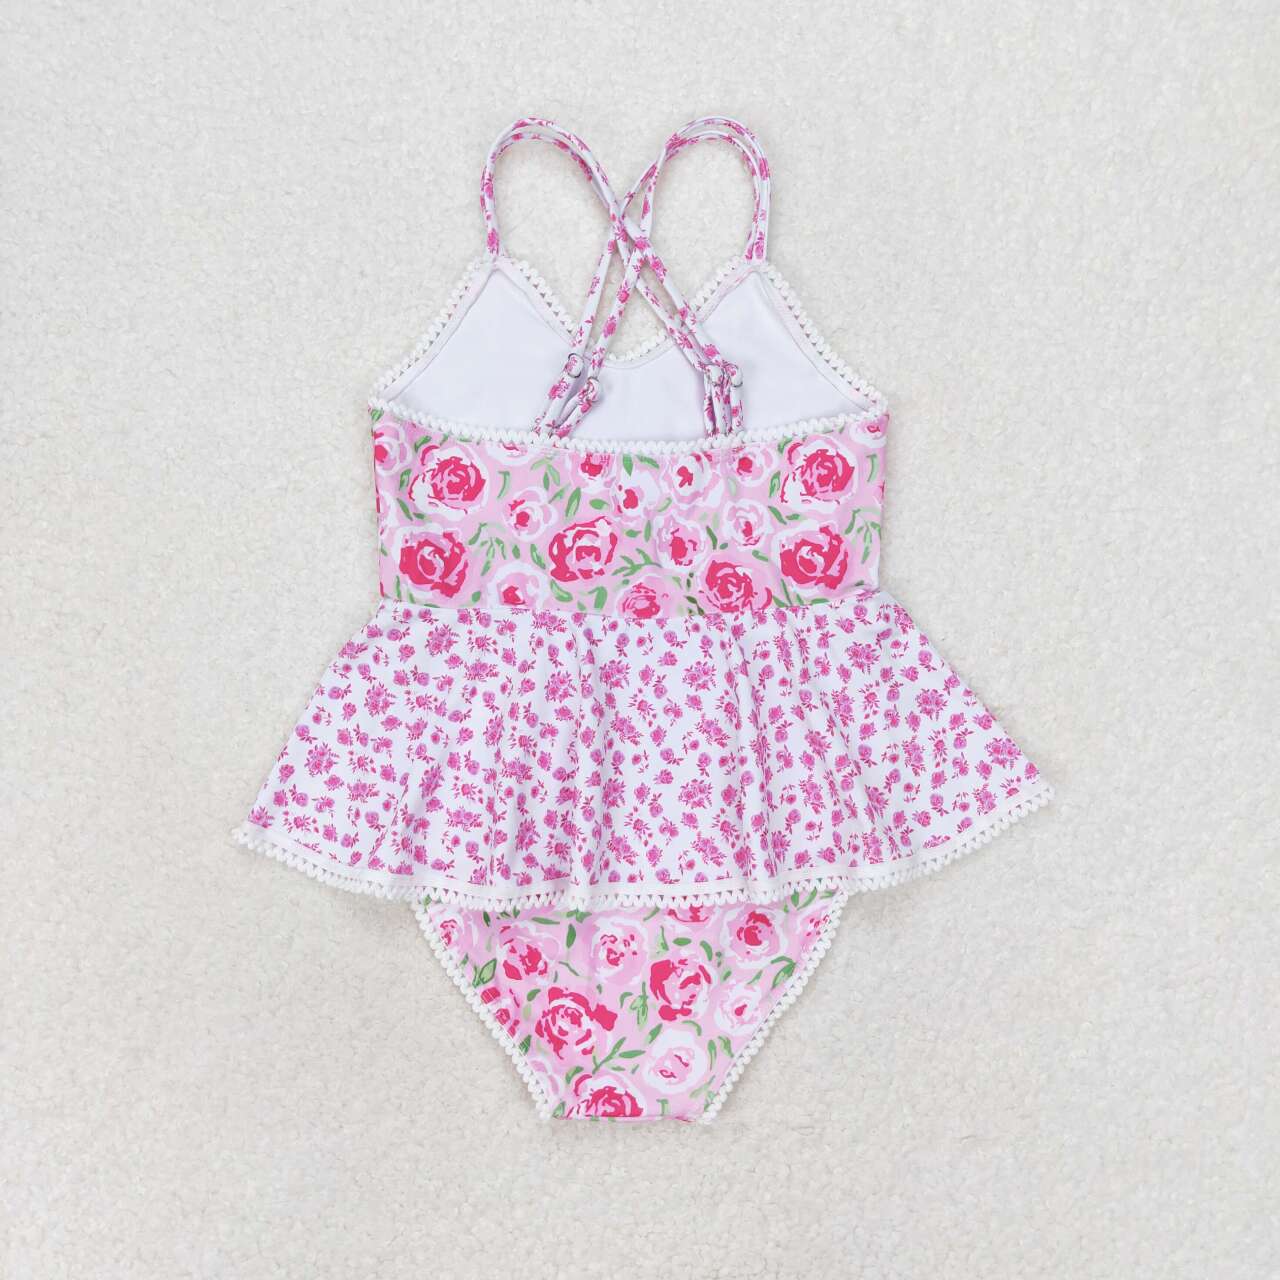 S0247 Pink and white floral lace one-piece swimsuit